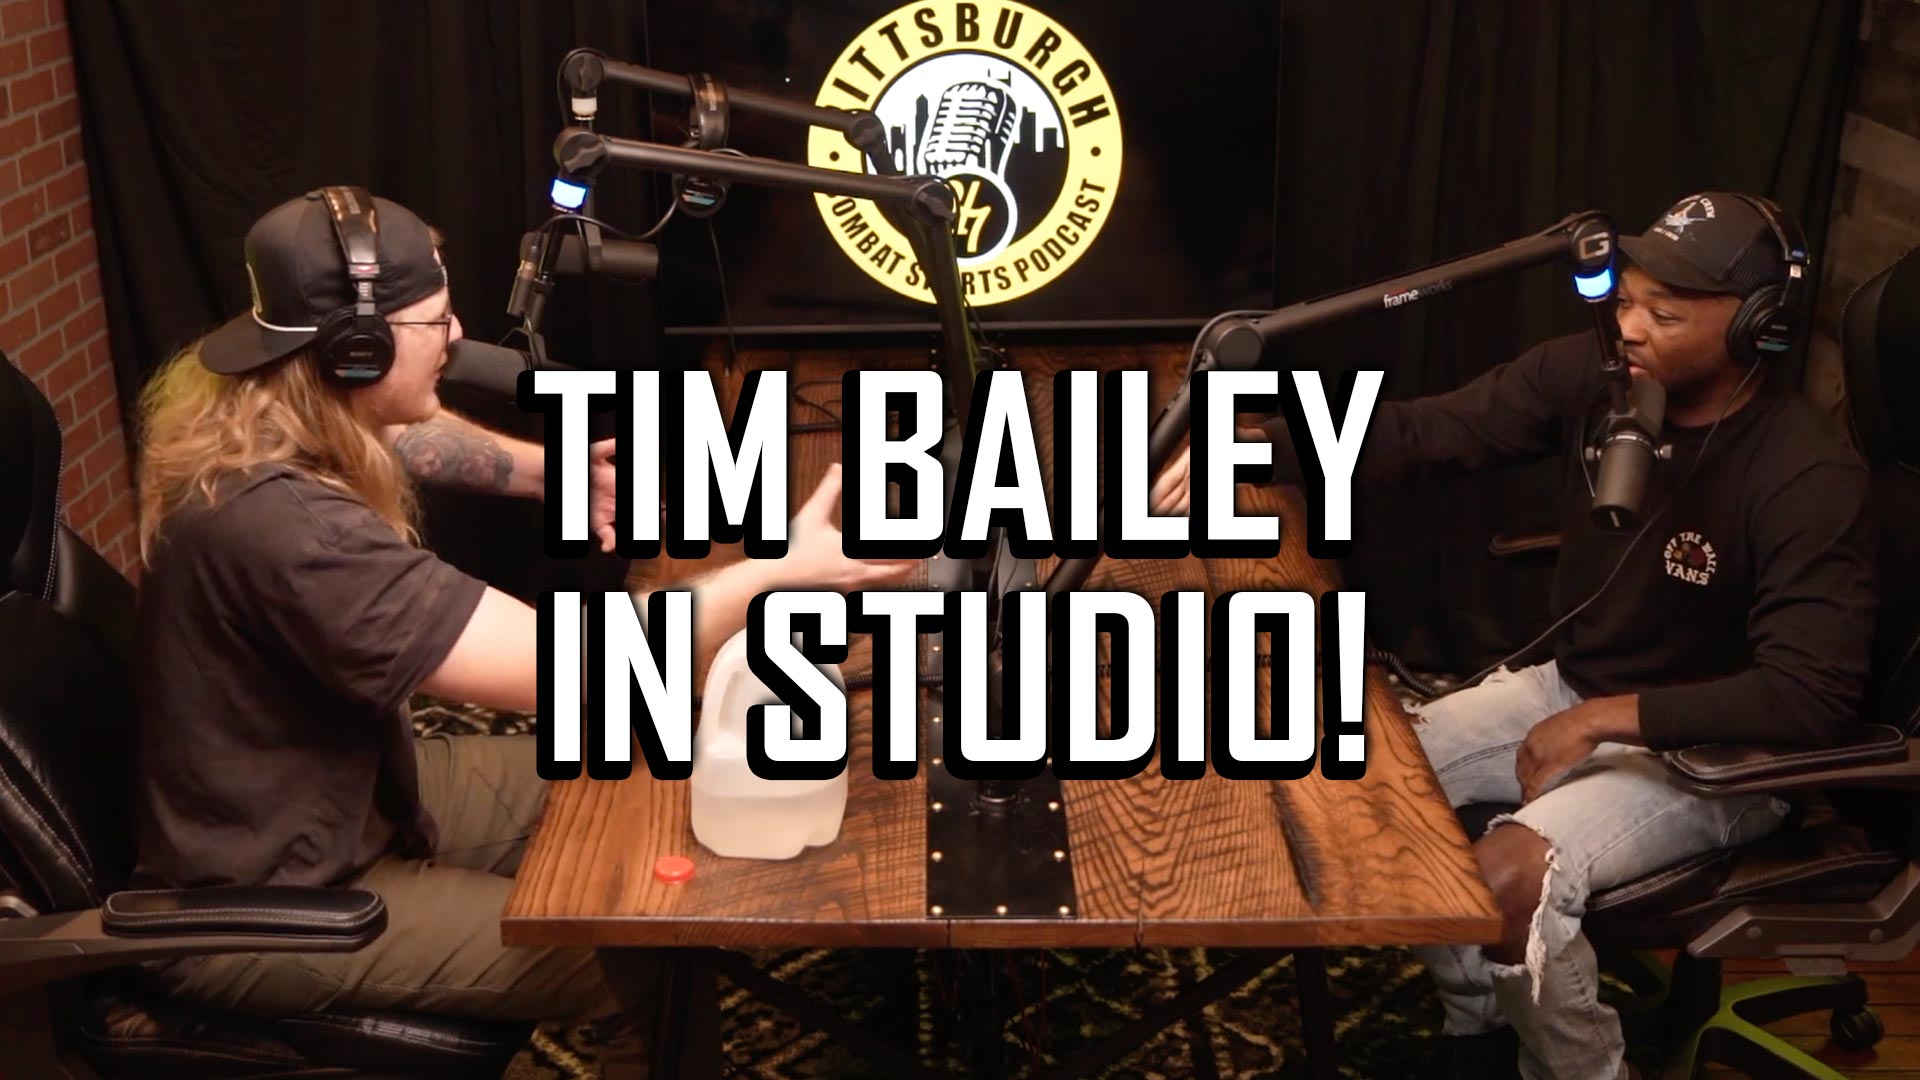 TIM-BAILEY-in-studio-full-size-thumbnail-podcast-247-fighting-championships